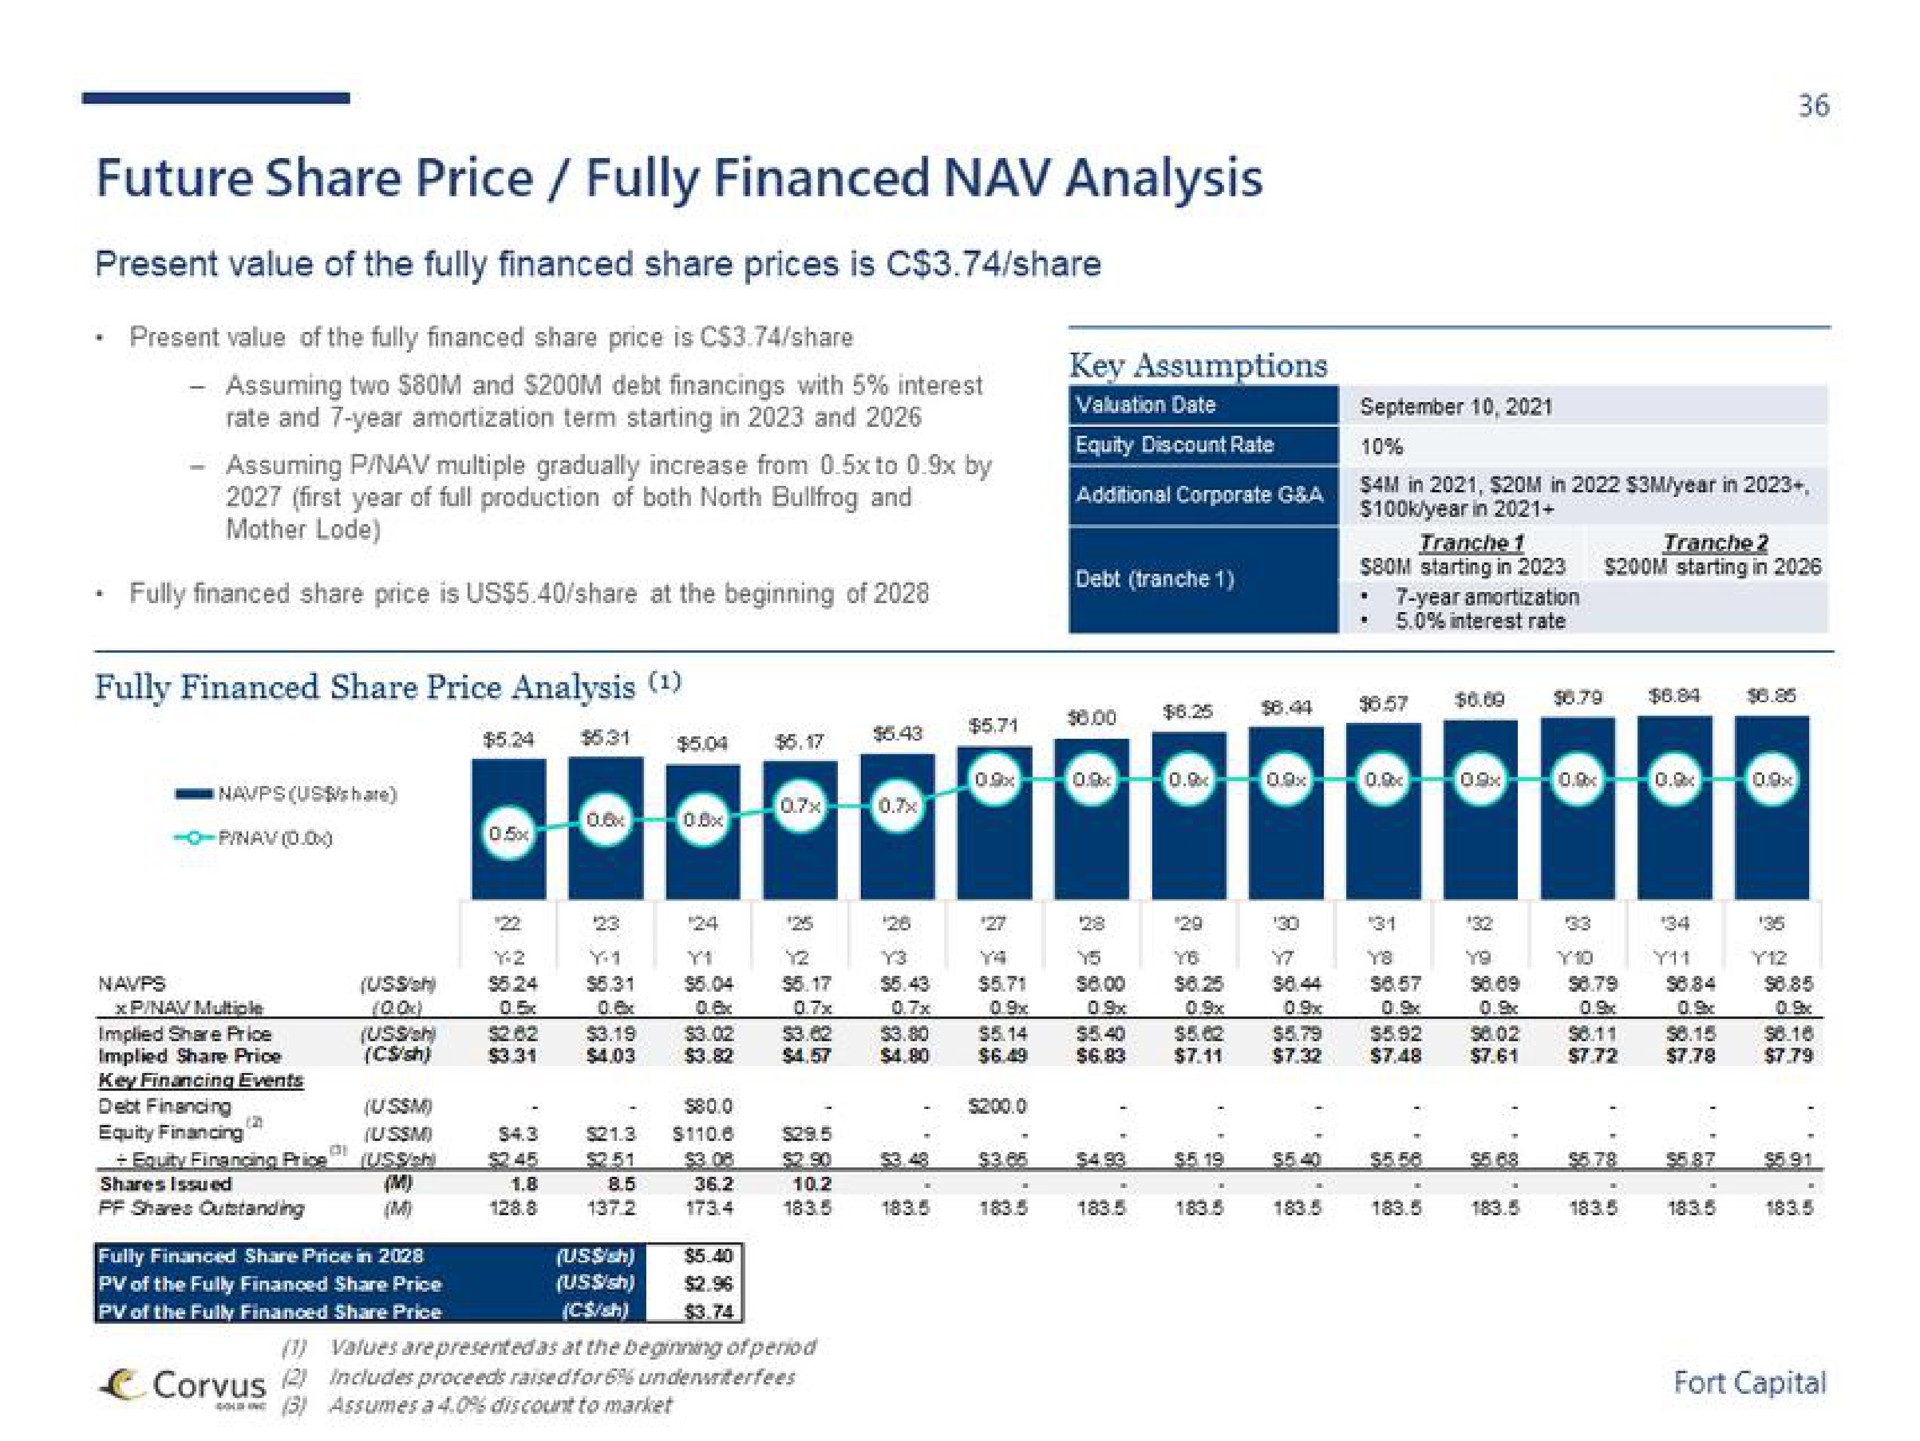 future share price fully financed analysis | Fort Capital